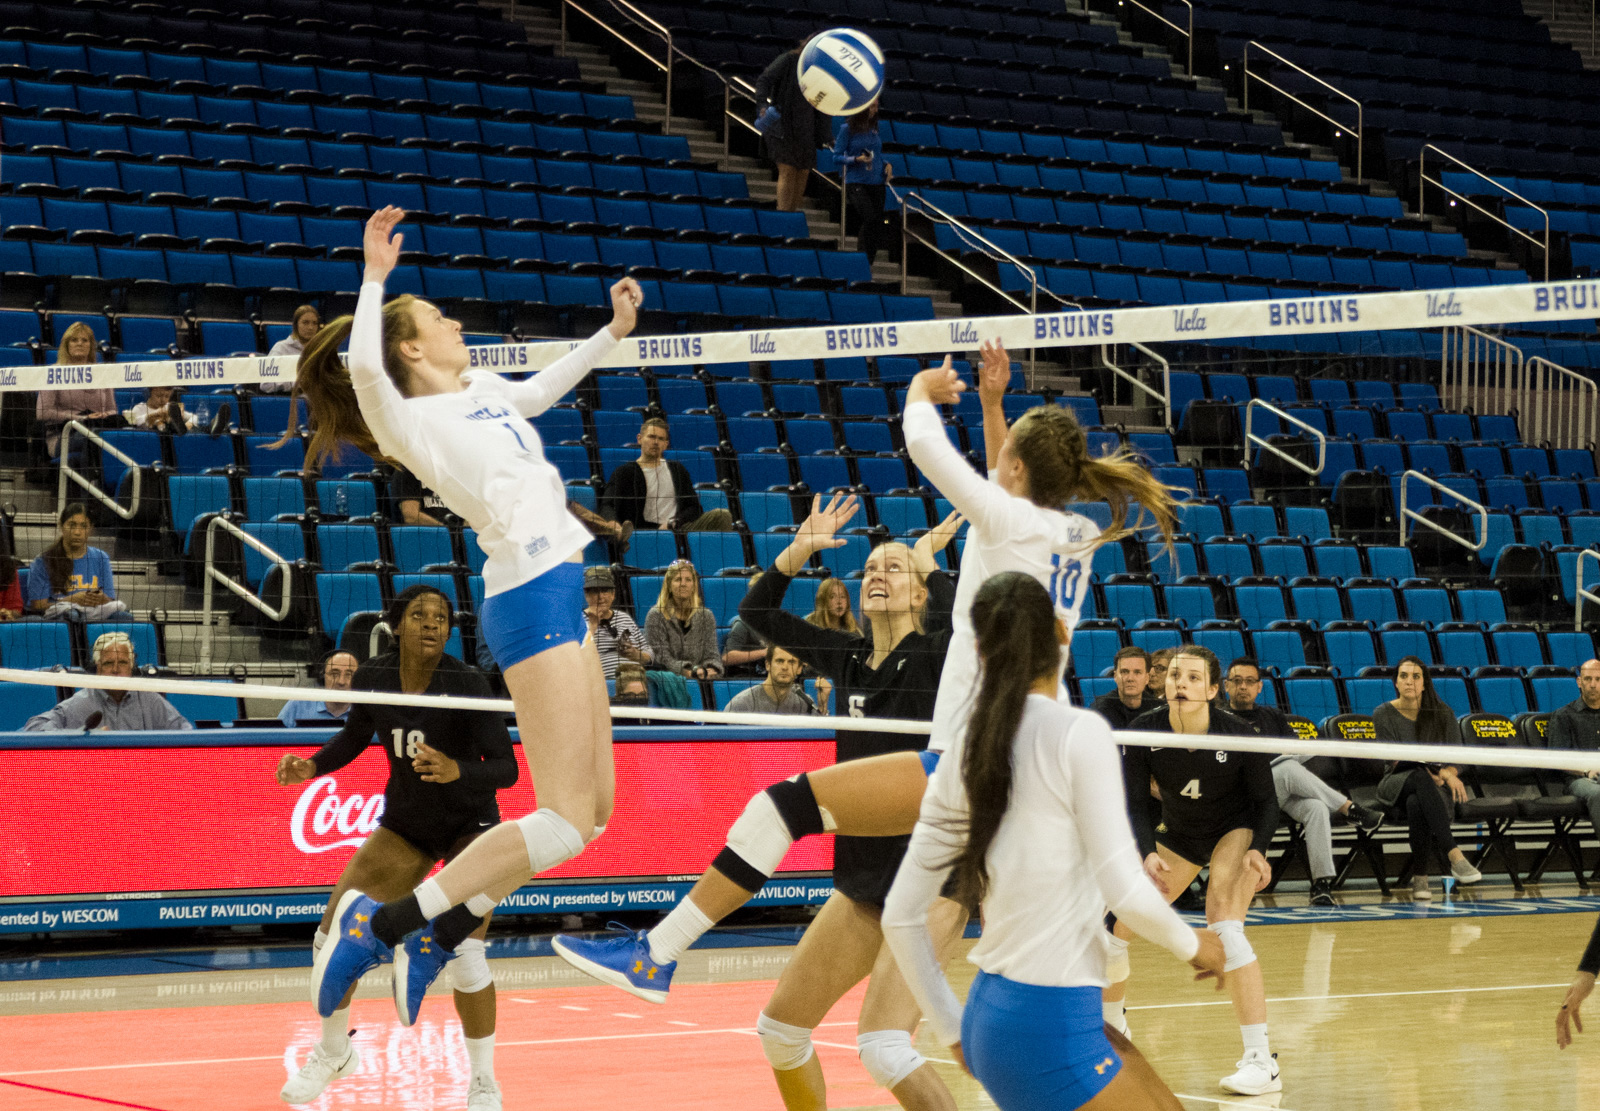 Ucla Womens Volleyball Closes Out Hawaii Tournament With Two Wins One